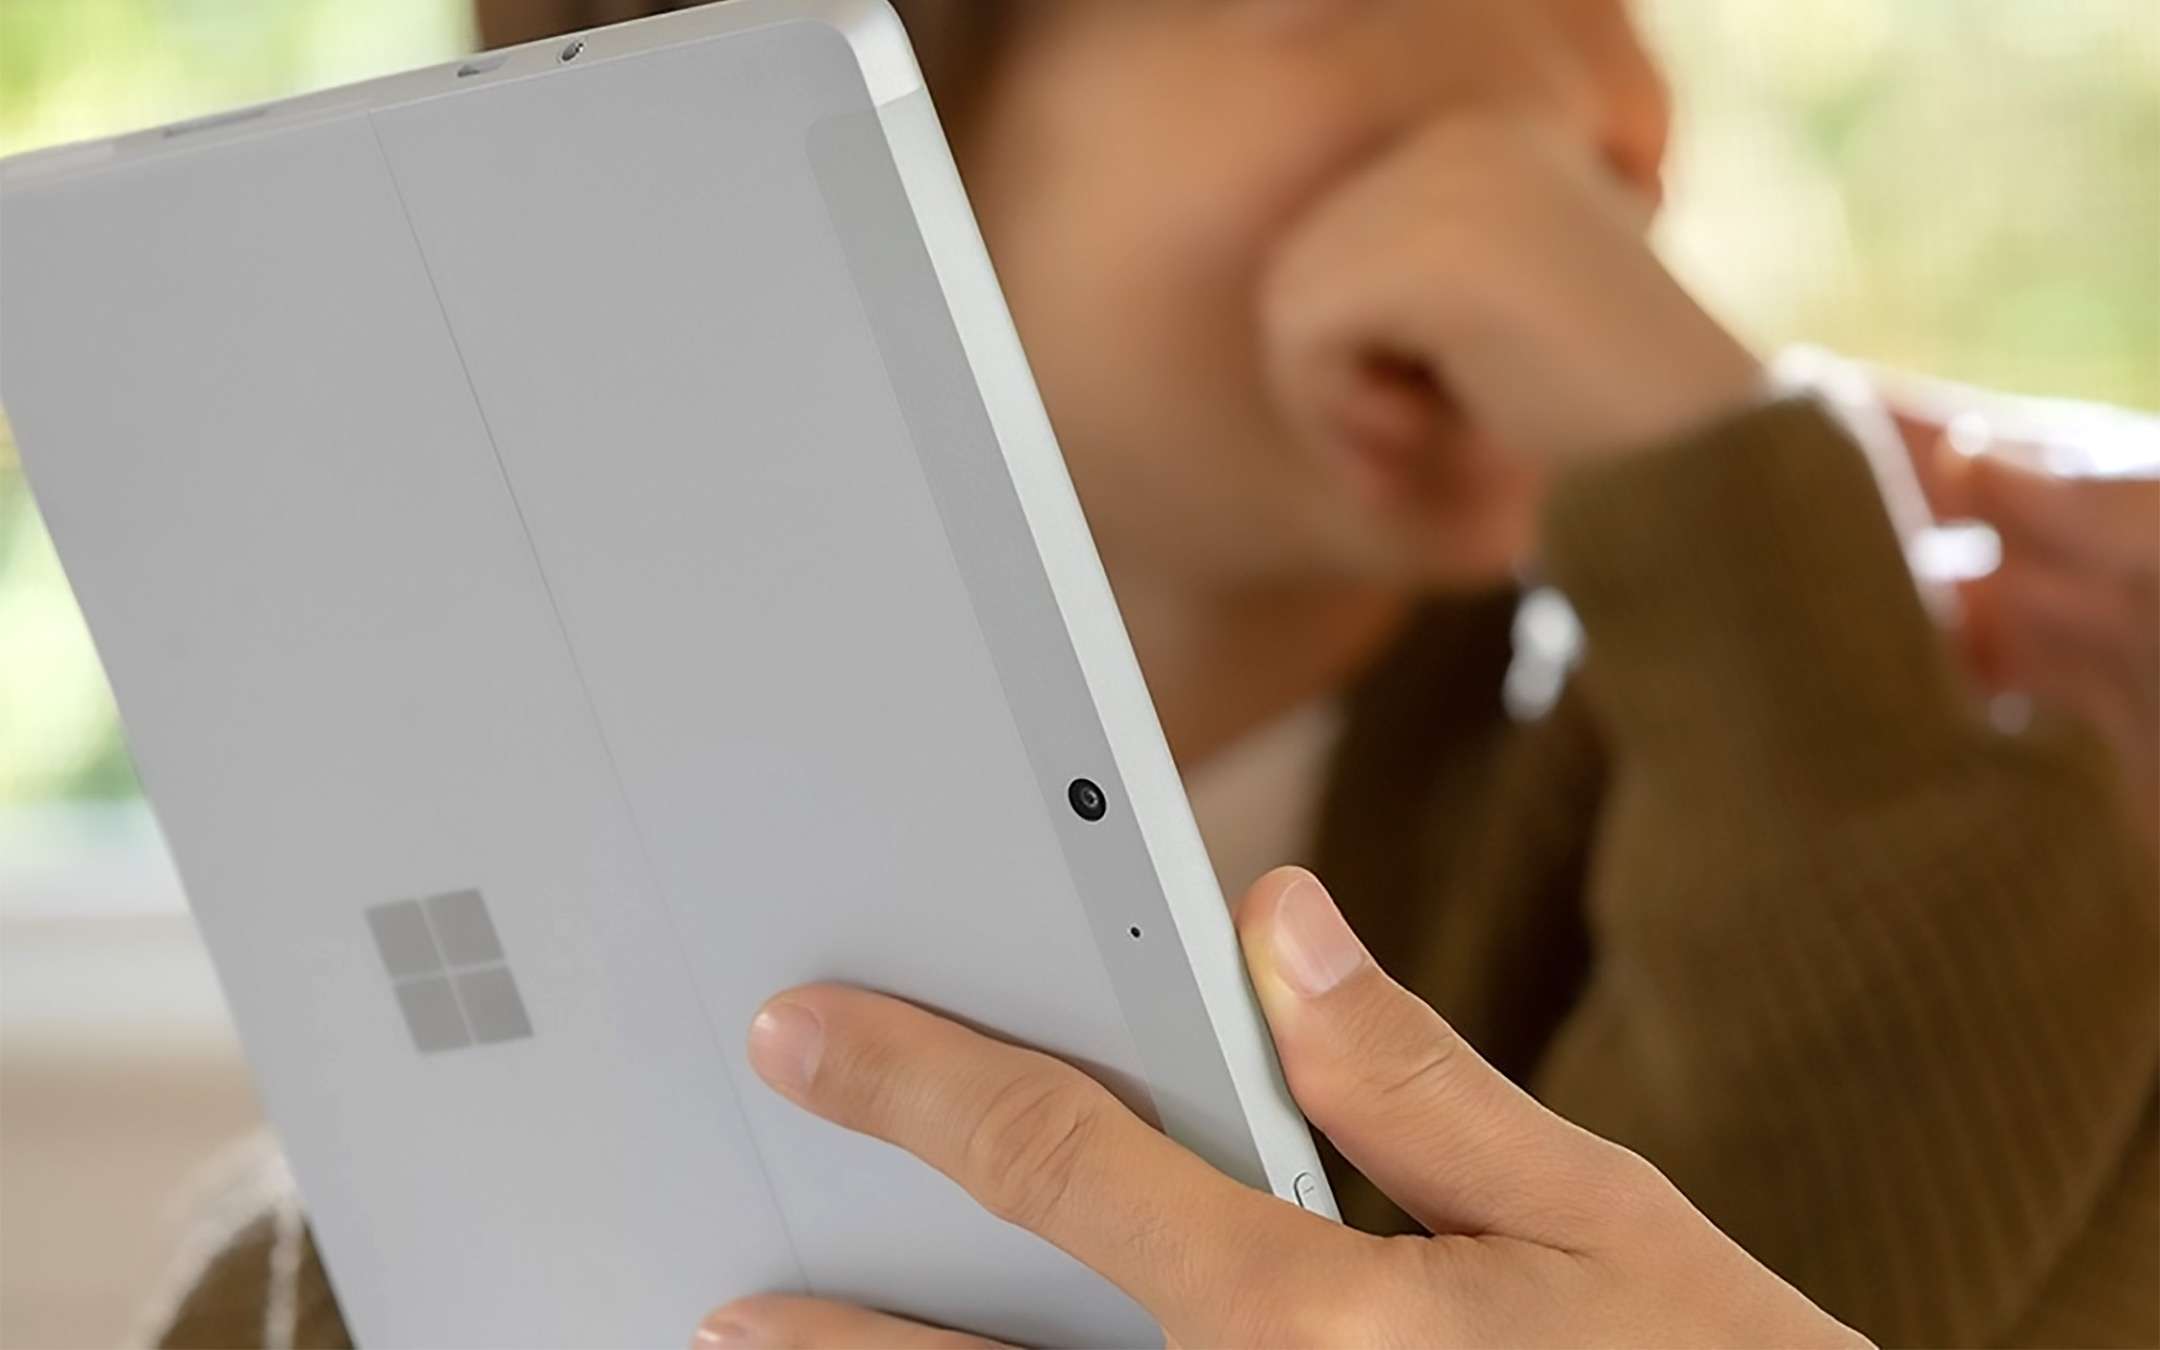 Bigger tablets are saving the PC market